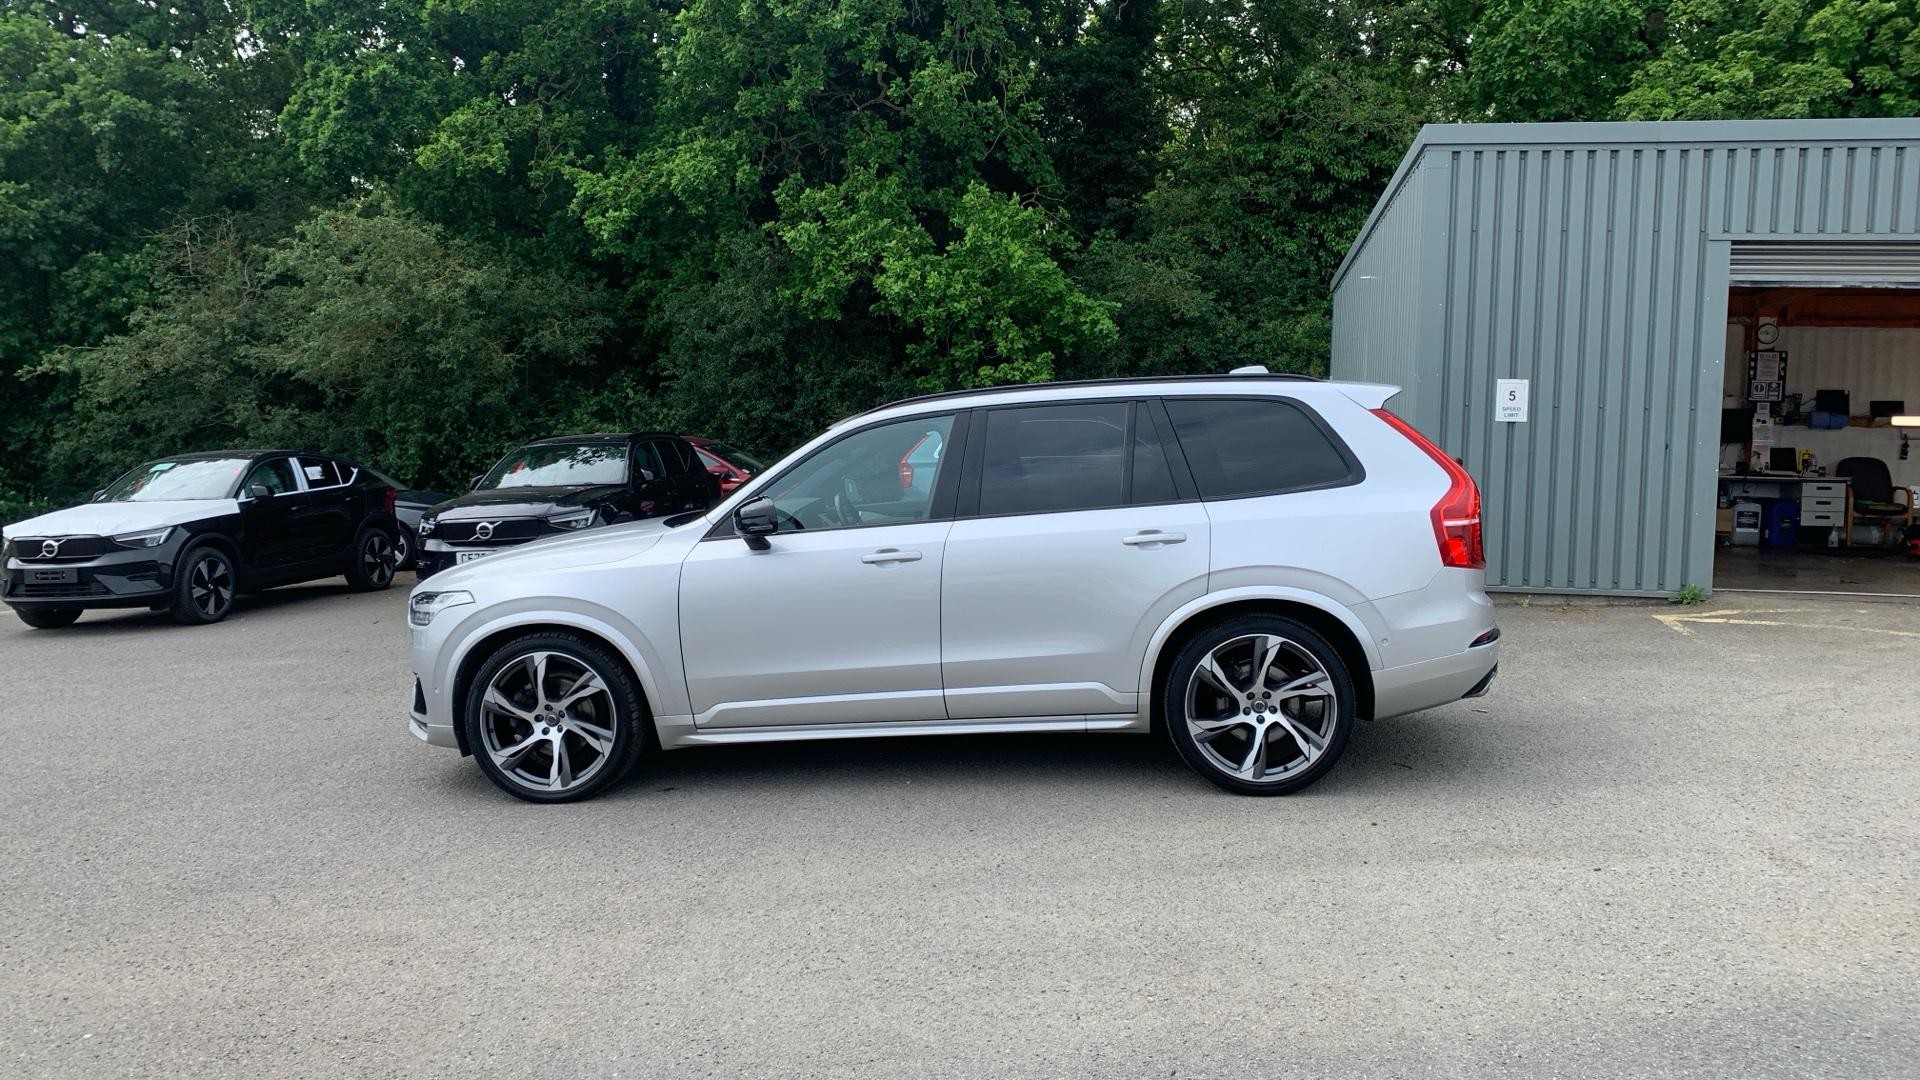 Volvo XC90 2.0 B5D [235] R DESIGN Pro 5dr AWD Geartronic (KN20CGG) image 8